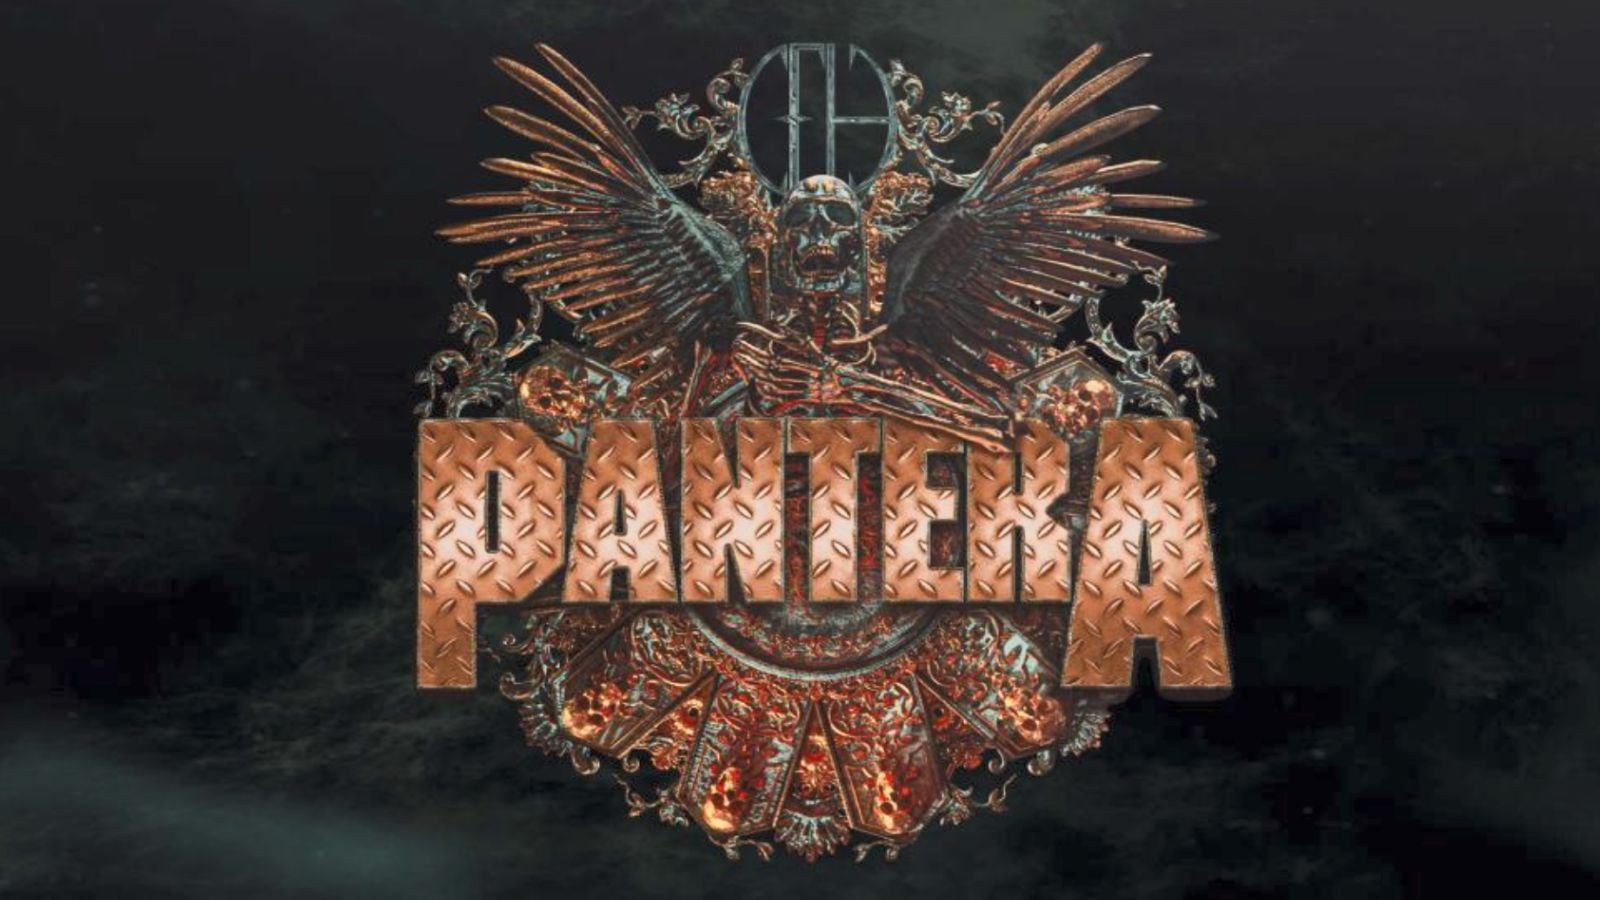 <p><span>Pantera is, for many of us, one of the biggest metal bands of all time. This new lineup features Zakk Wylde on guitar and Charlie Benante (Anthrax) on drums. If you want to listen to all the classics with an all-star, metal royalty formation, this is your best chance.</span></p> <ul>   <li><span>Starts on March 23rd in Sydney, Australia</span></li>   <li><span>Ends on October 10th in Sacramento, California</span></li>  </ul> <p><span>Full tour dates and tickets </span><a href="https://pantera.com/tour/?nocache=1"><span>here</span></a><span>.</span></p>